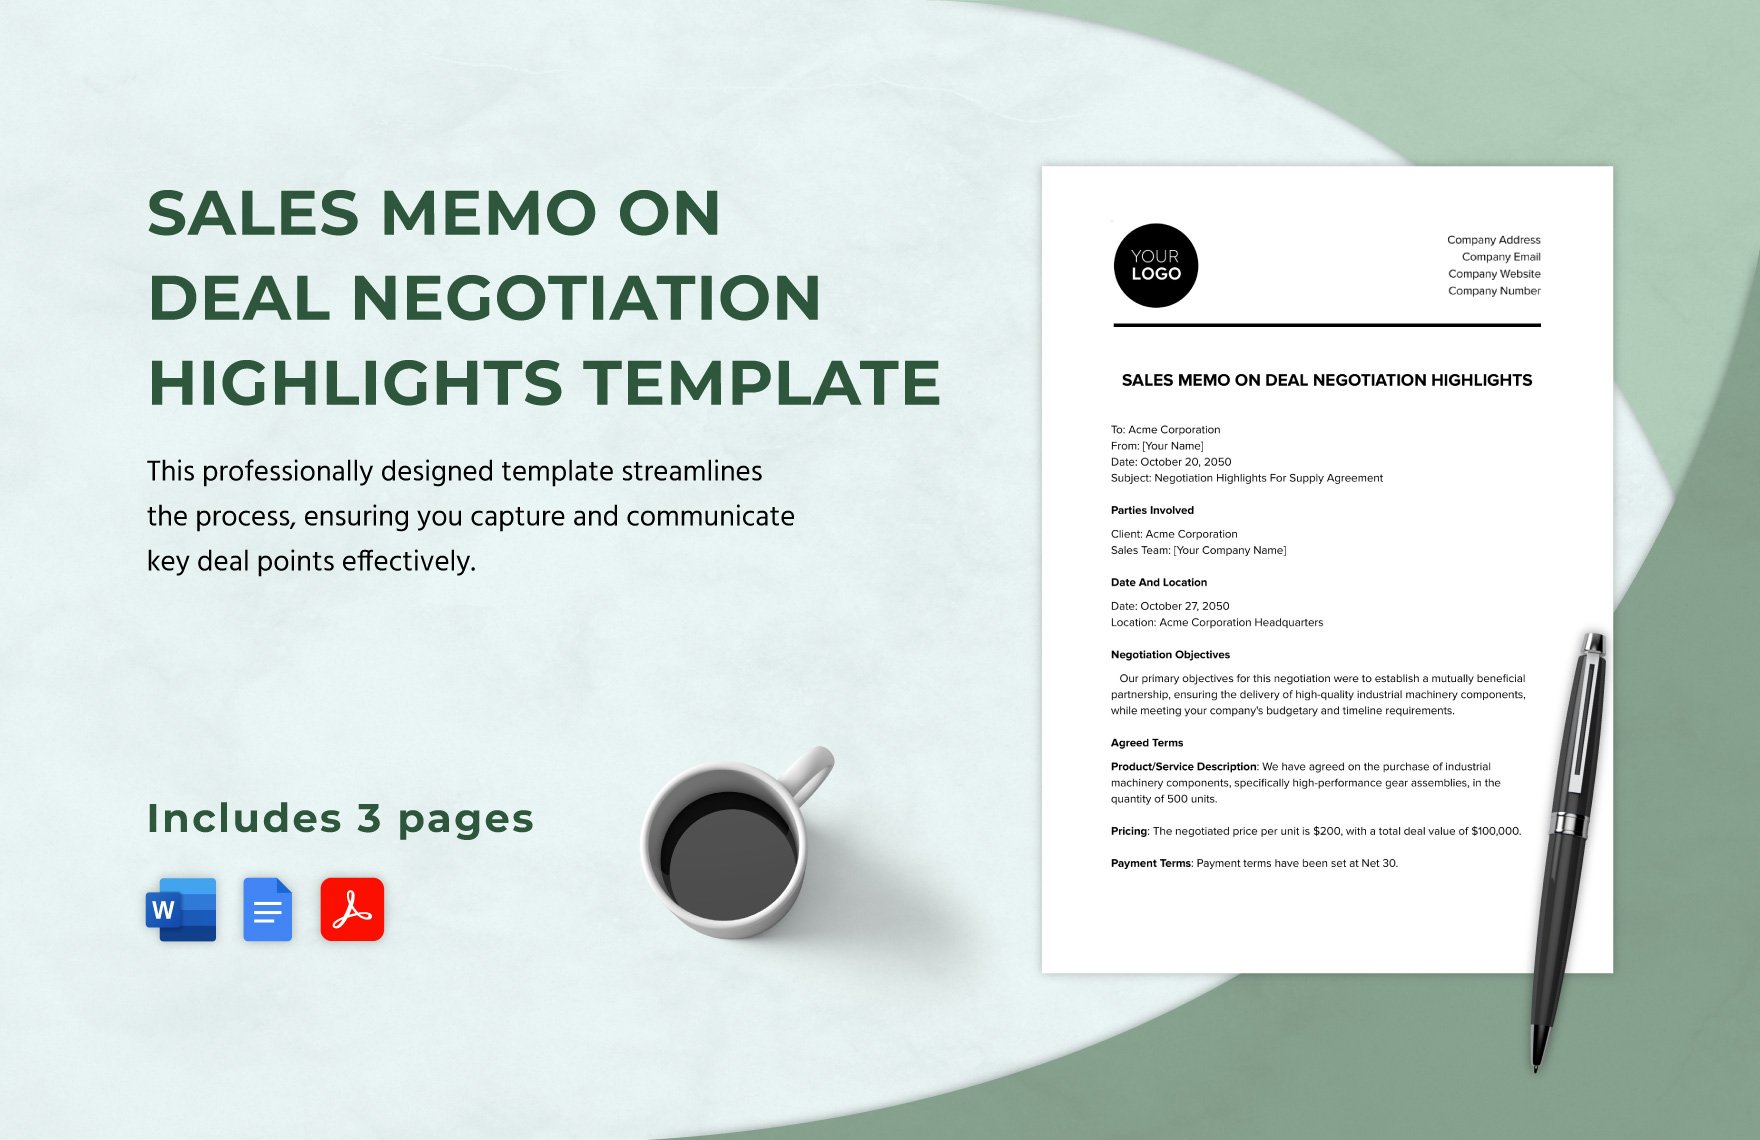 Sales Memo on Deal Negotiation Highlights Template